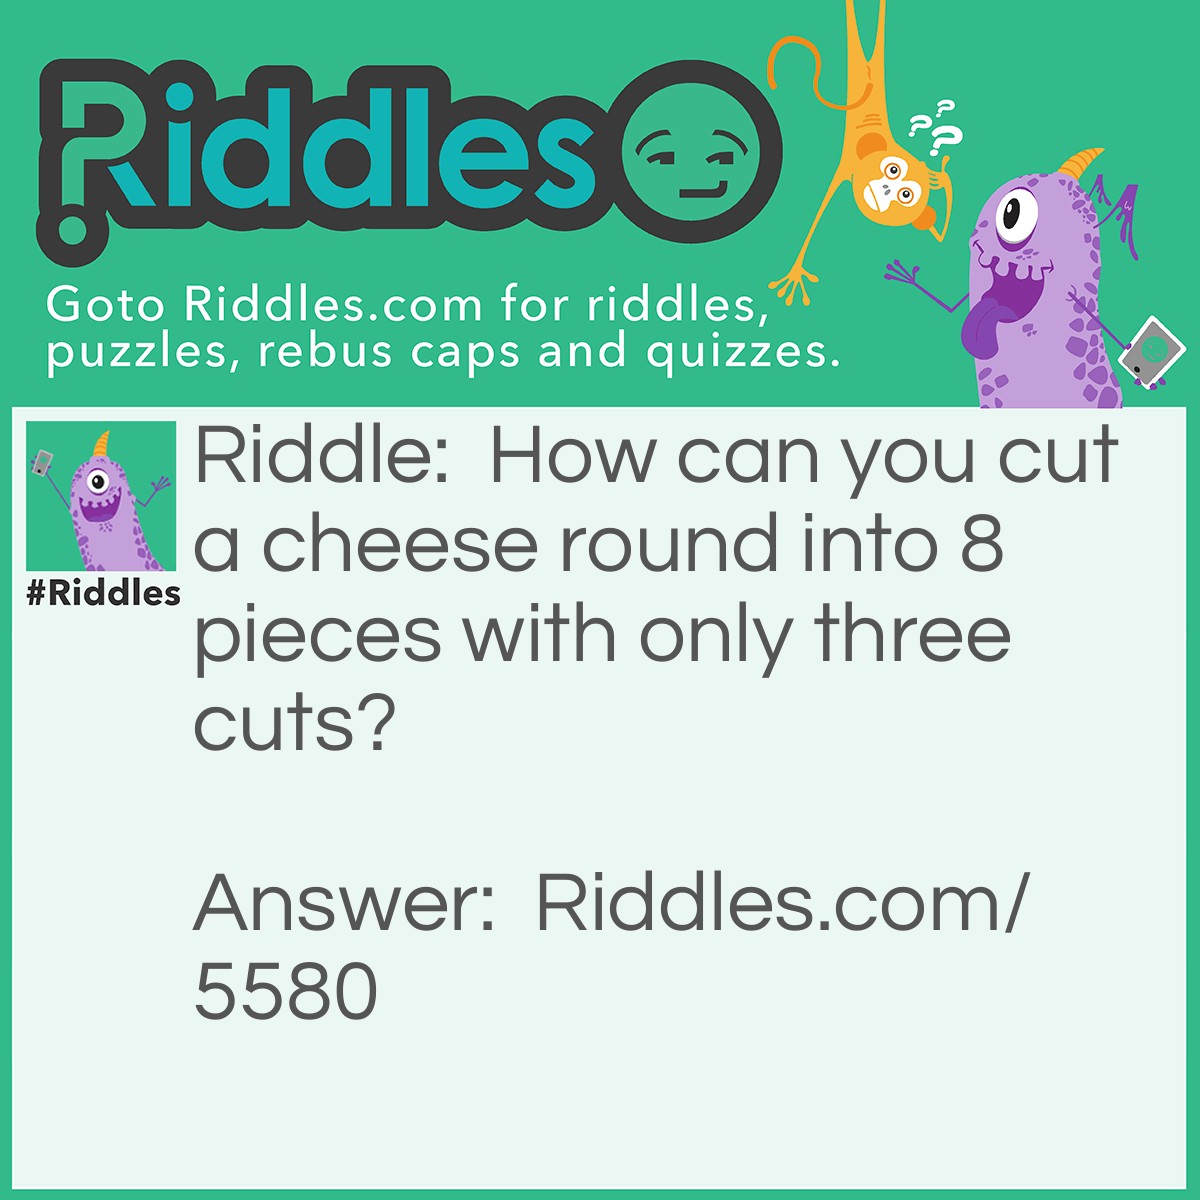 Riddle: How can you cut a cheese round into 8 pieces with only three cuts? Answer: First you cut the cylinder lengthwise. With the two pieces stacked end to end, you cut the cheese into quarters with two cuts.  The result is three cuts and 8 pieces of cheese. See the image below for three cuts needed to divide a cheese round into eight pieces.
<img src="https://www.riddles.com/uploads/images/3-cut-cheese-riddle.jpg" alt="" />